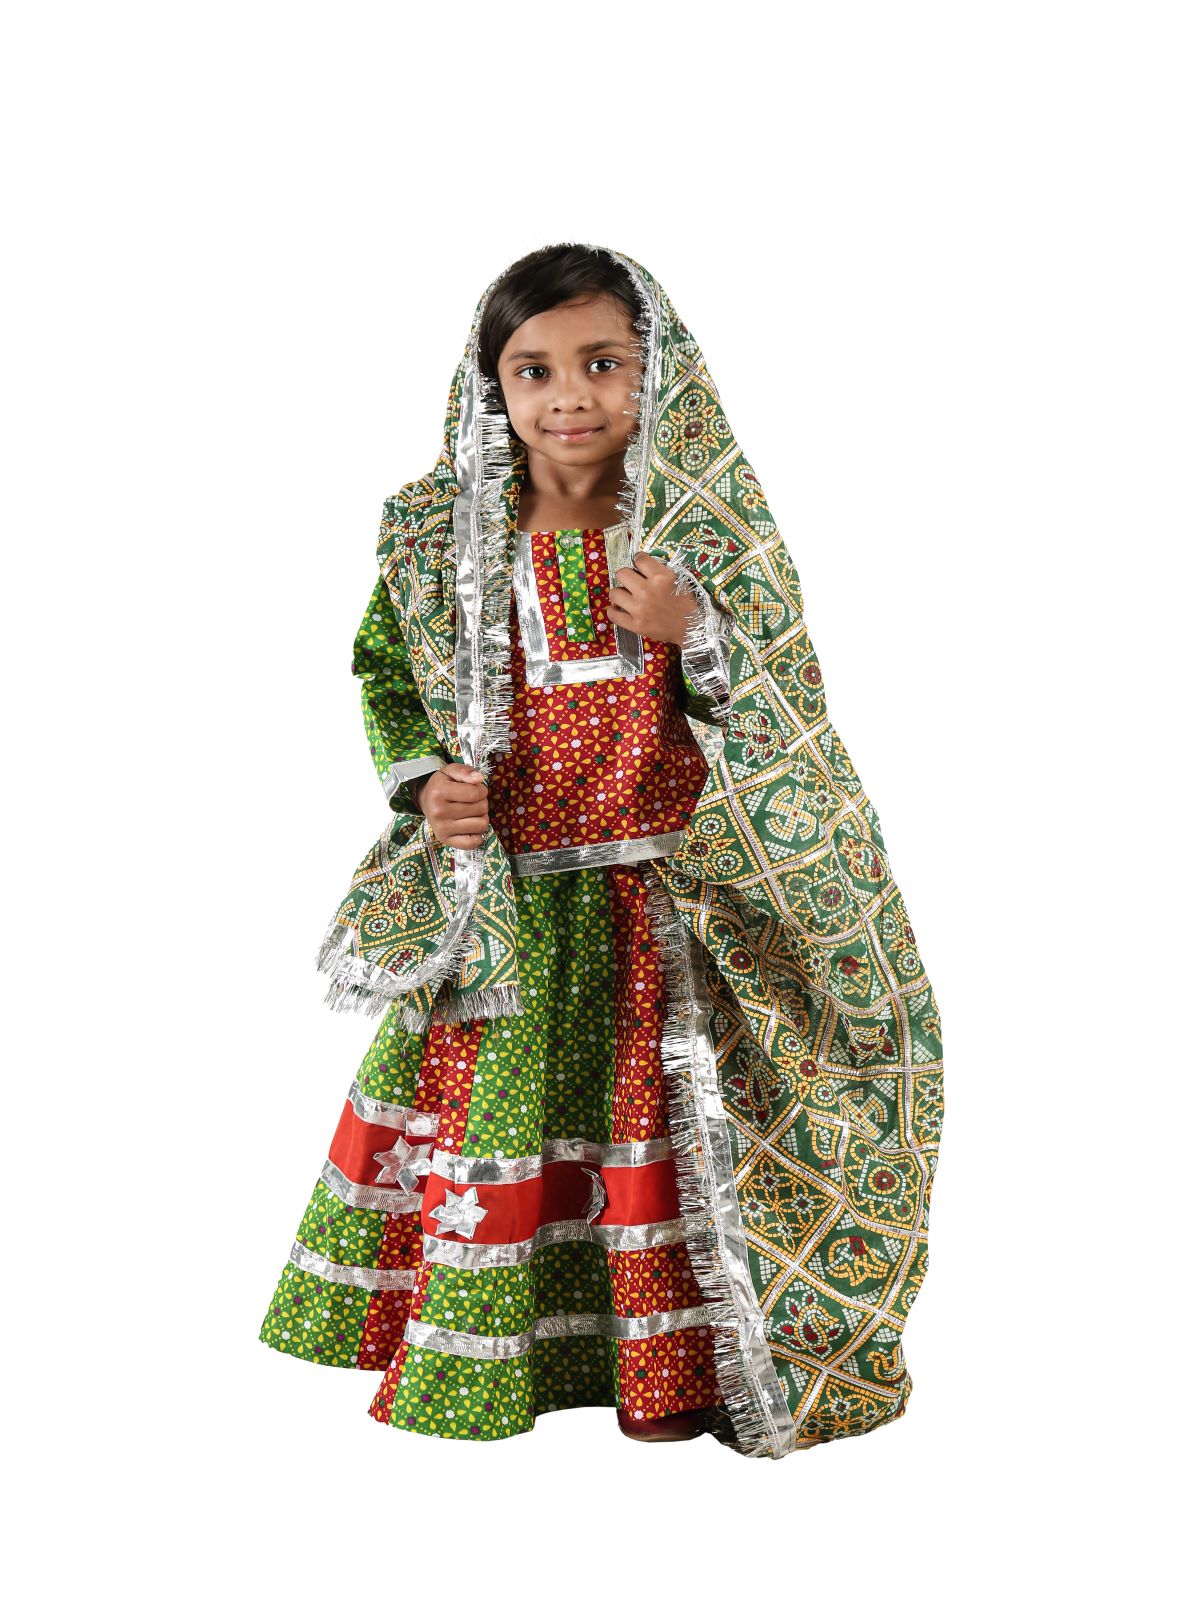 Rent or Buy Female Rajasthani Folk Costume for Girls Online in India